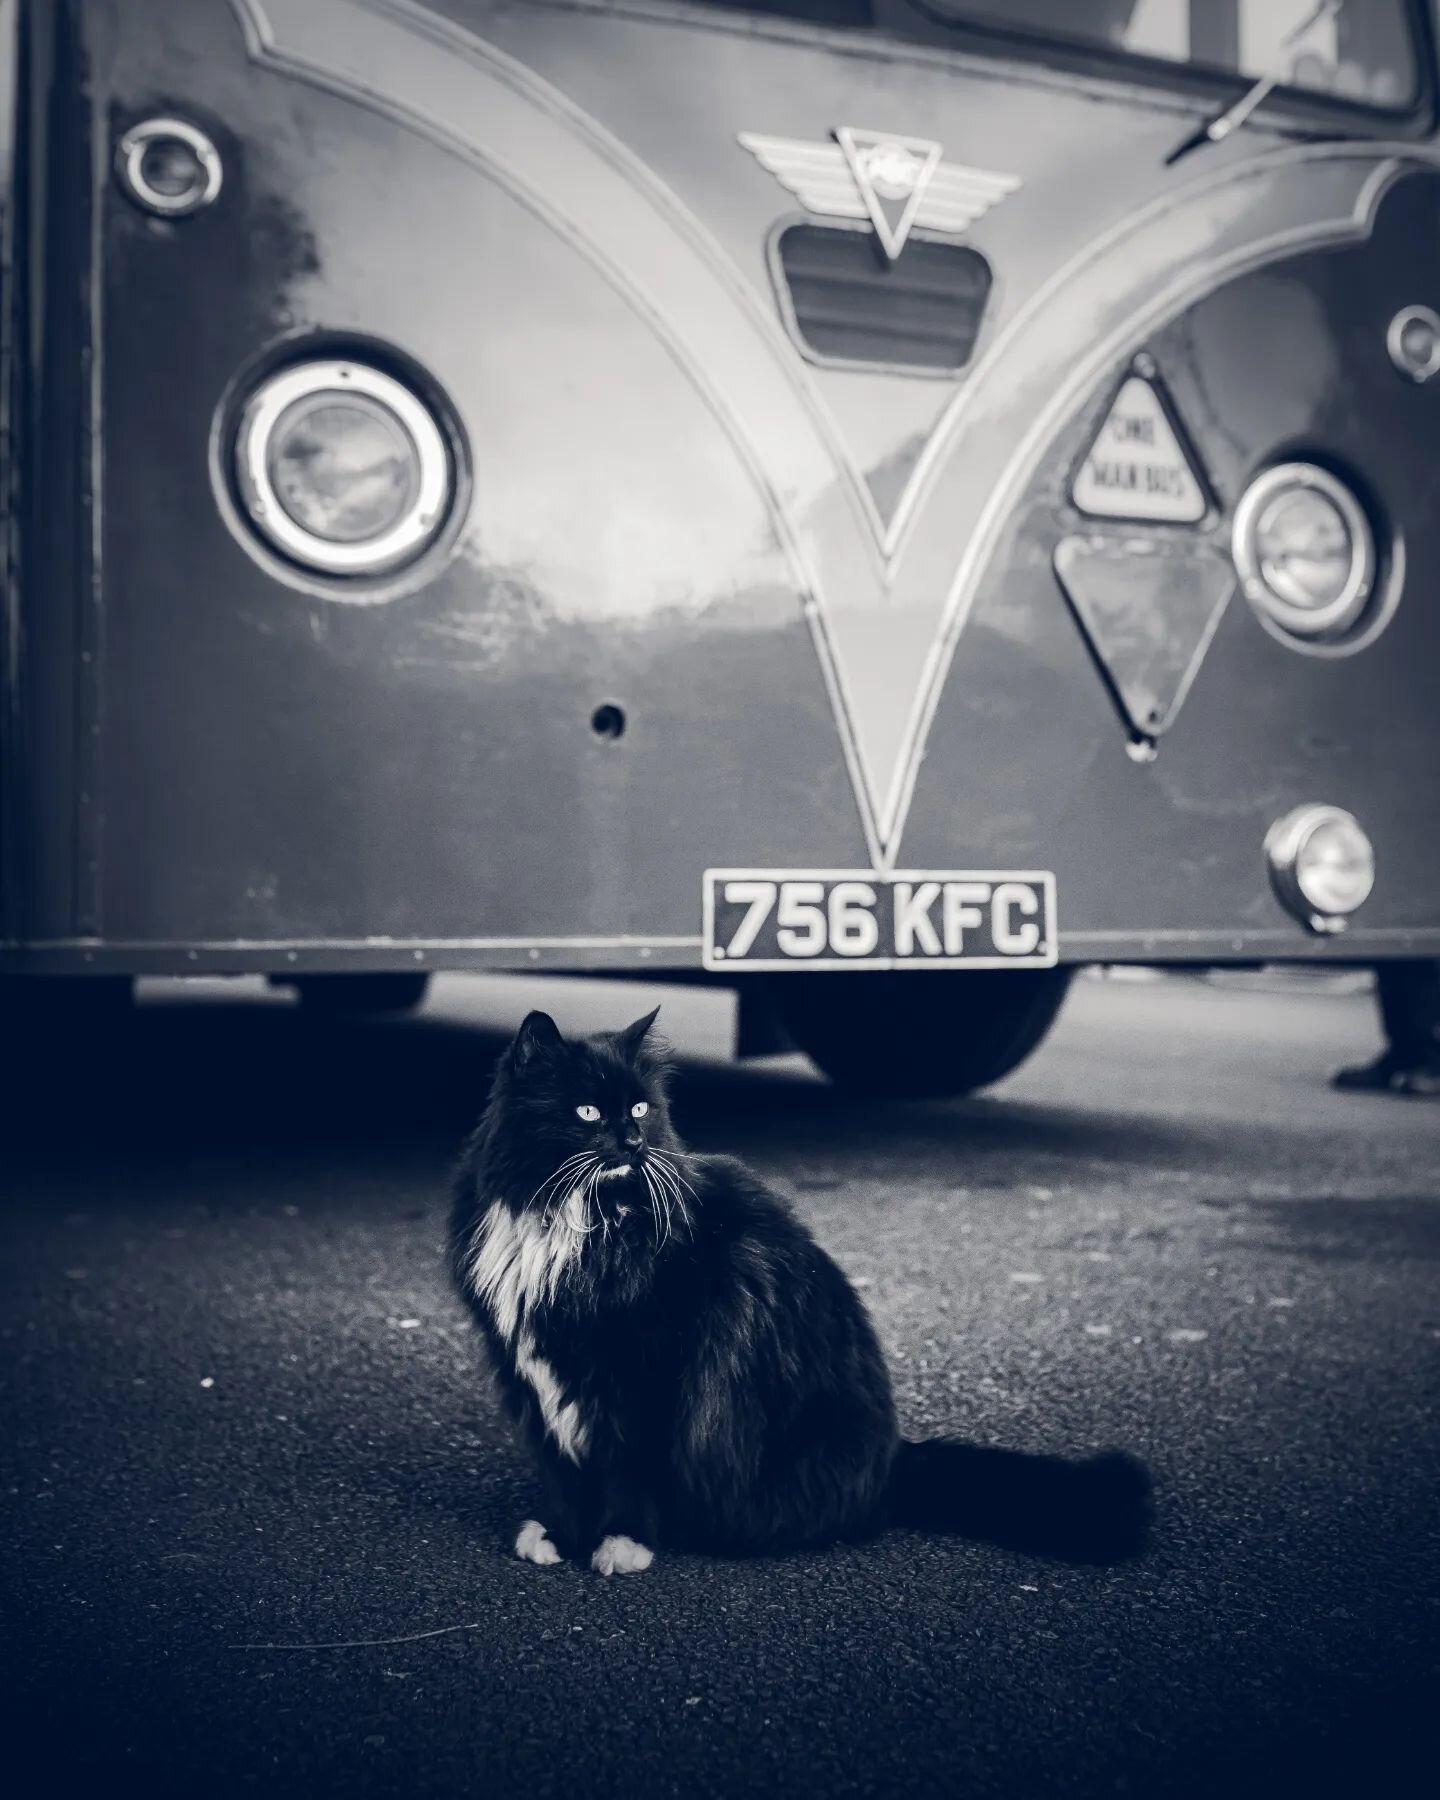 I got asked to cover one of the nicest birthday parties a few days ago. Full of fantastic folk, beautiful buses and cuddly cats. Many Happy Returns once again to @ashjblackman ! Did you know I was a bit of a bus fanatic? #Buses #Vintage #Birthday #Ca